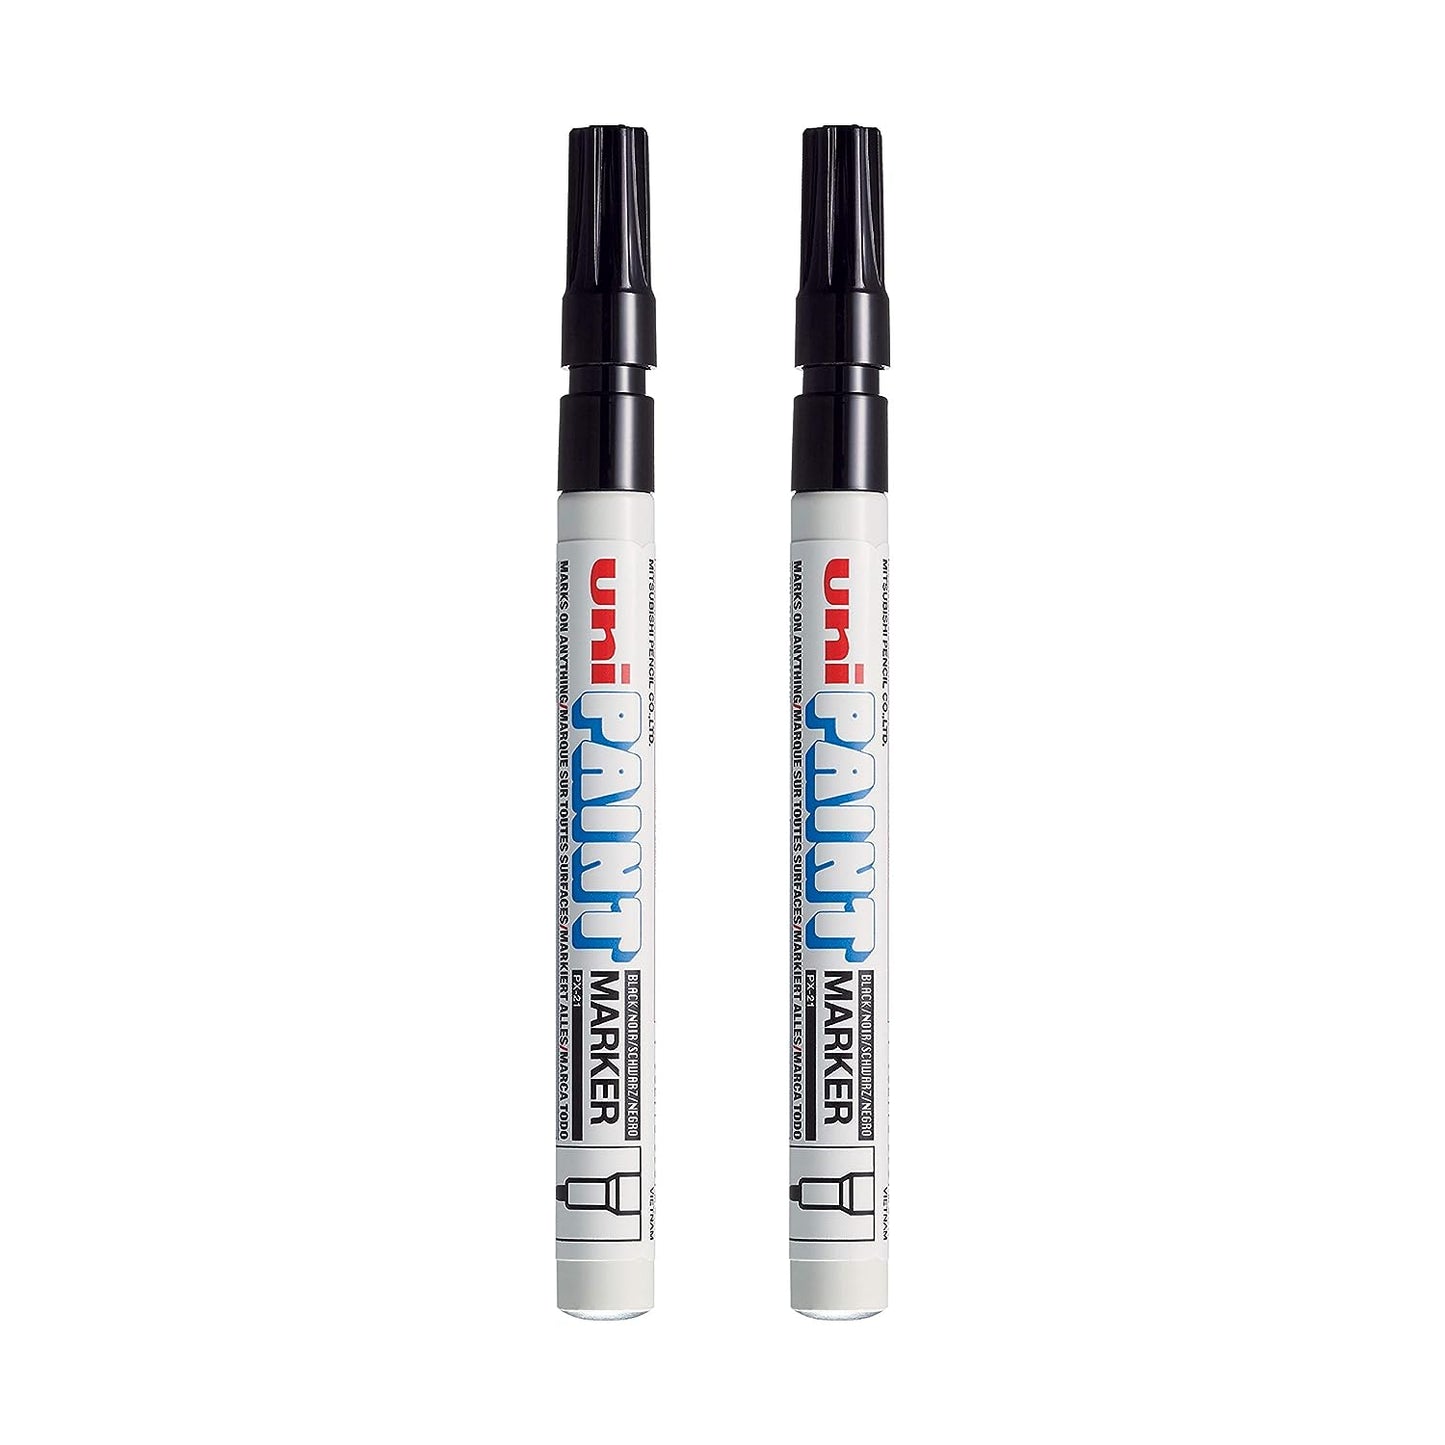 Uniball Px21 Paint Markers - Black